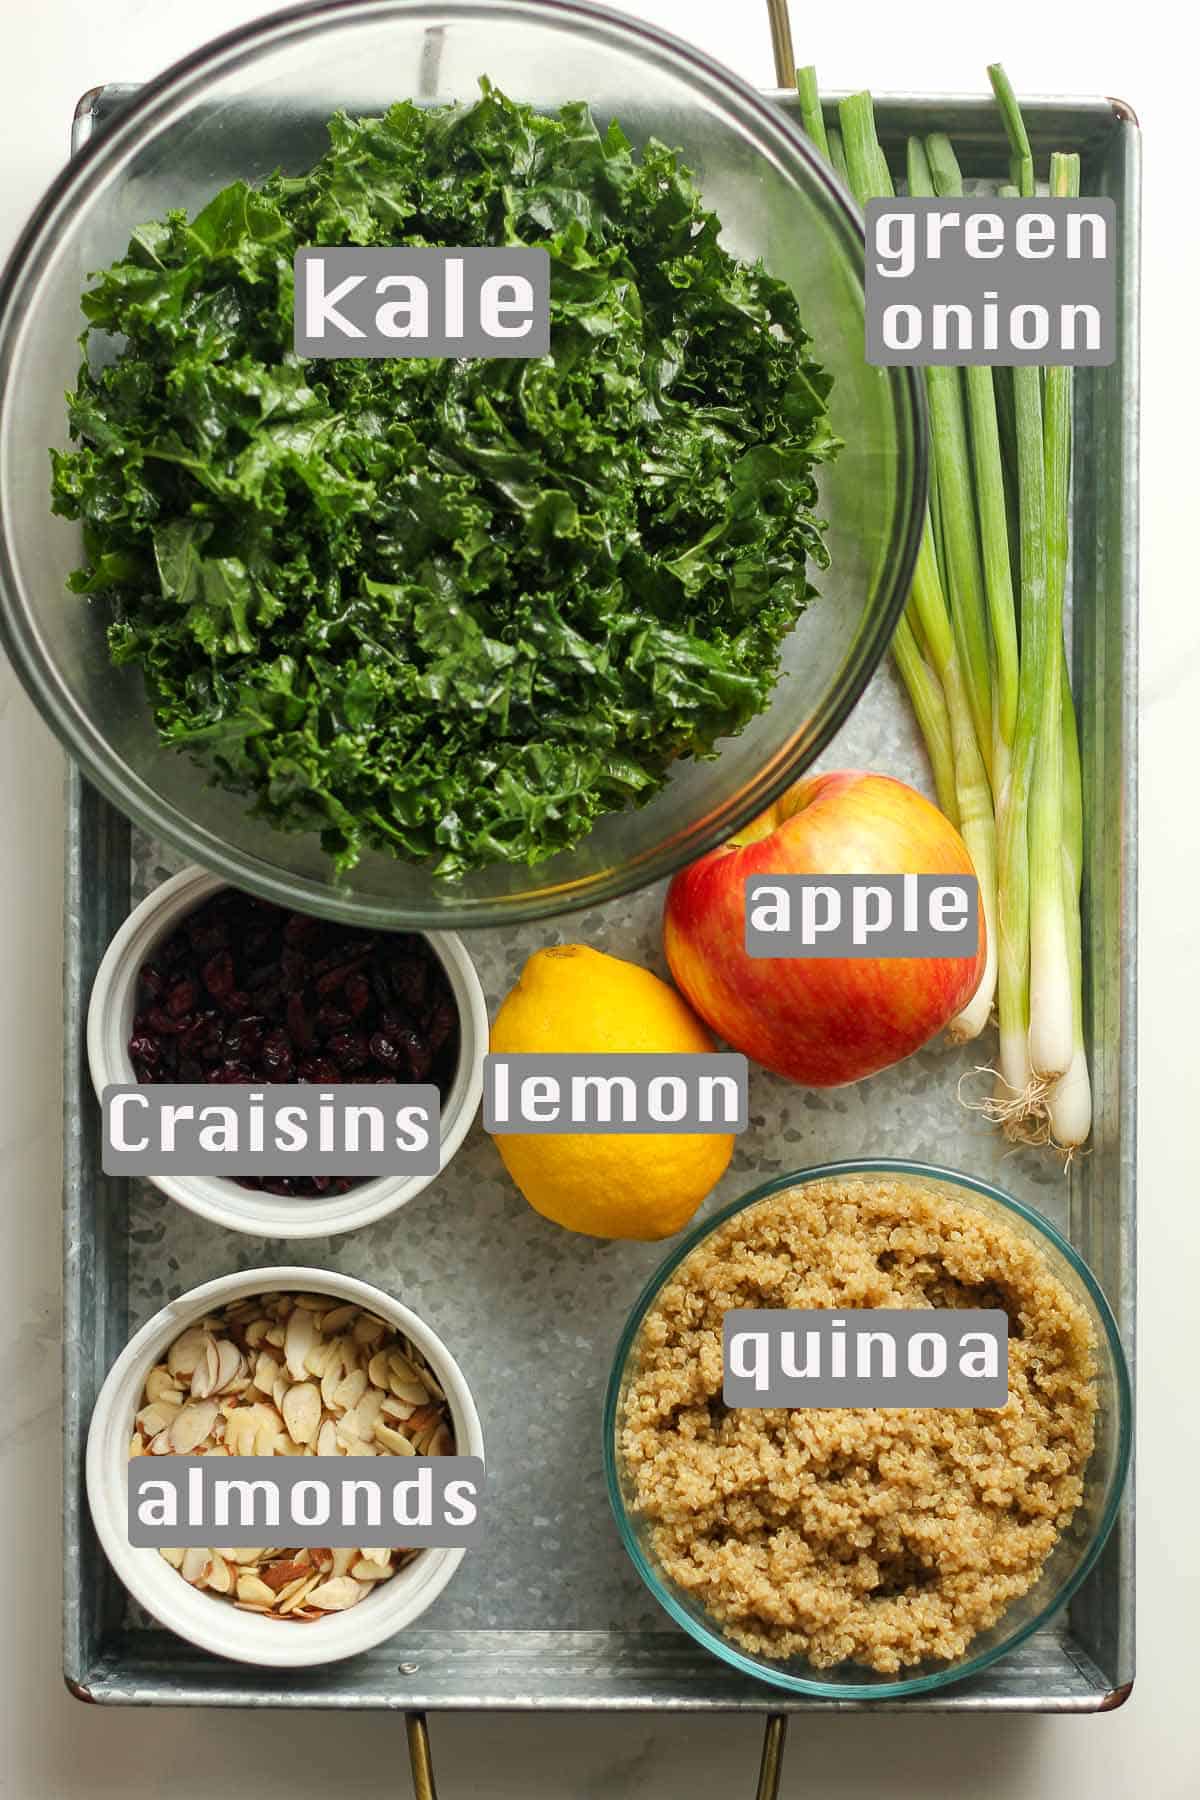 A tray of the salad ingredients, labeled.